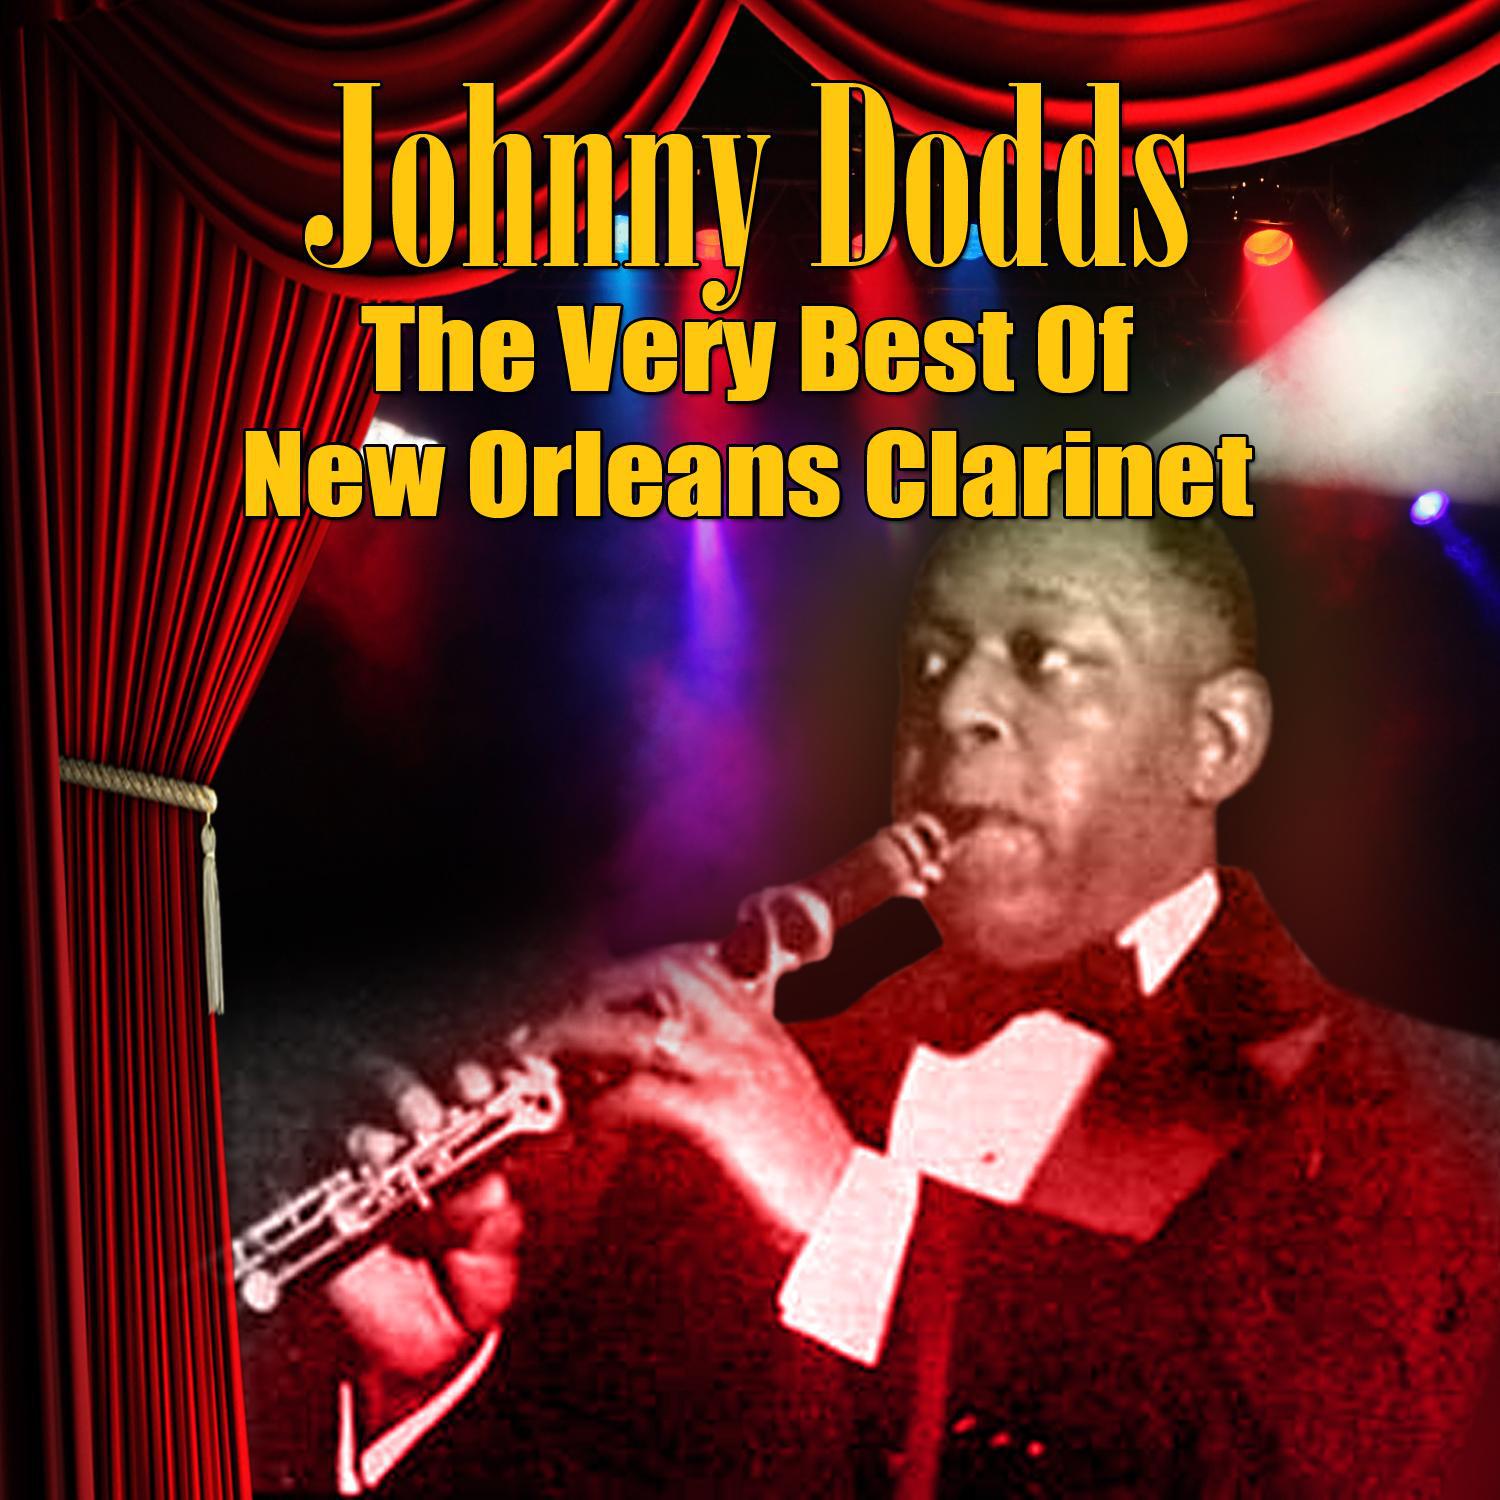 The Very Best Of New Orleans Clarinet